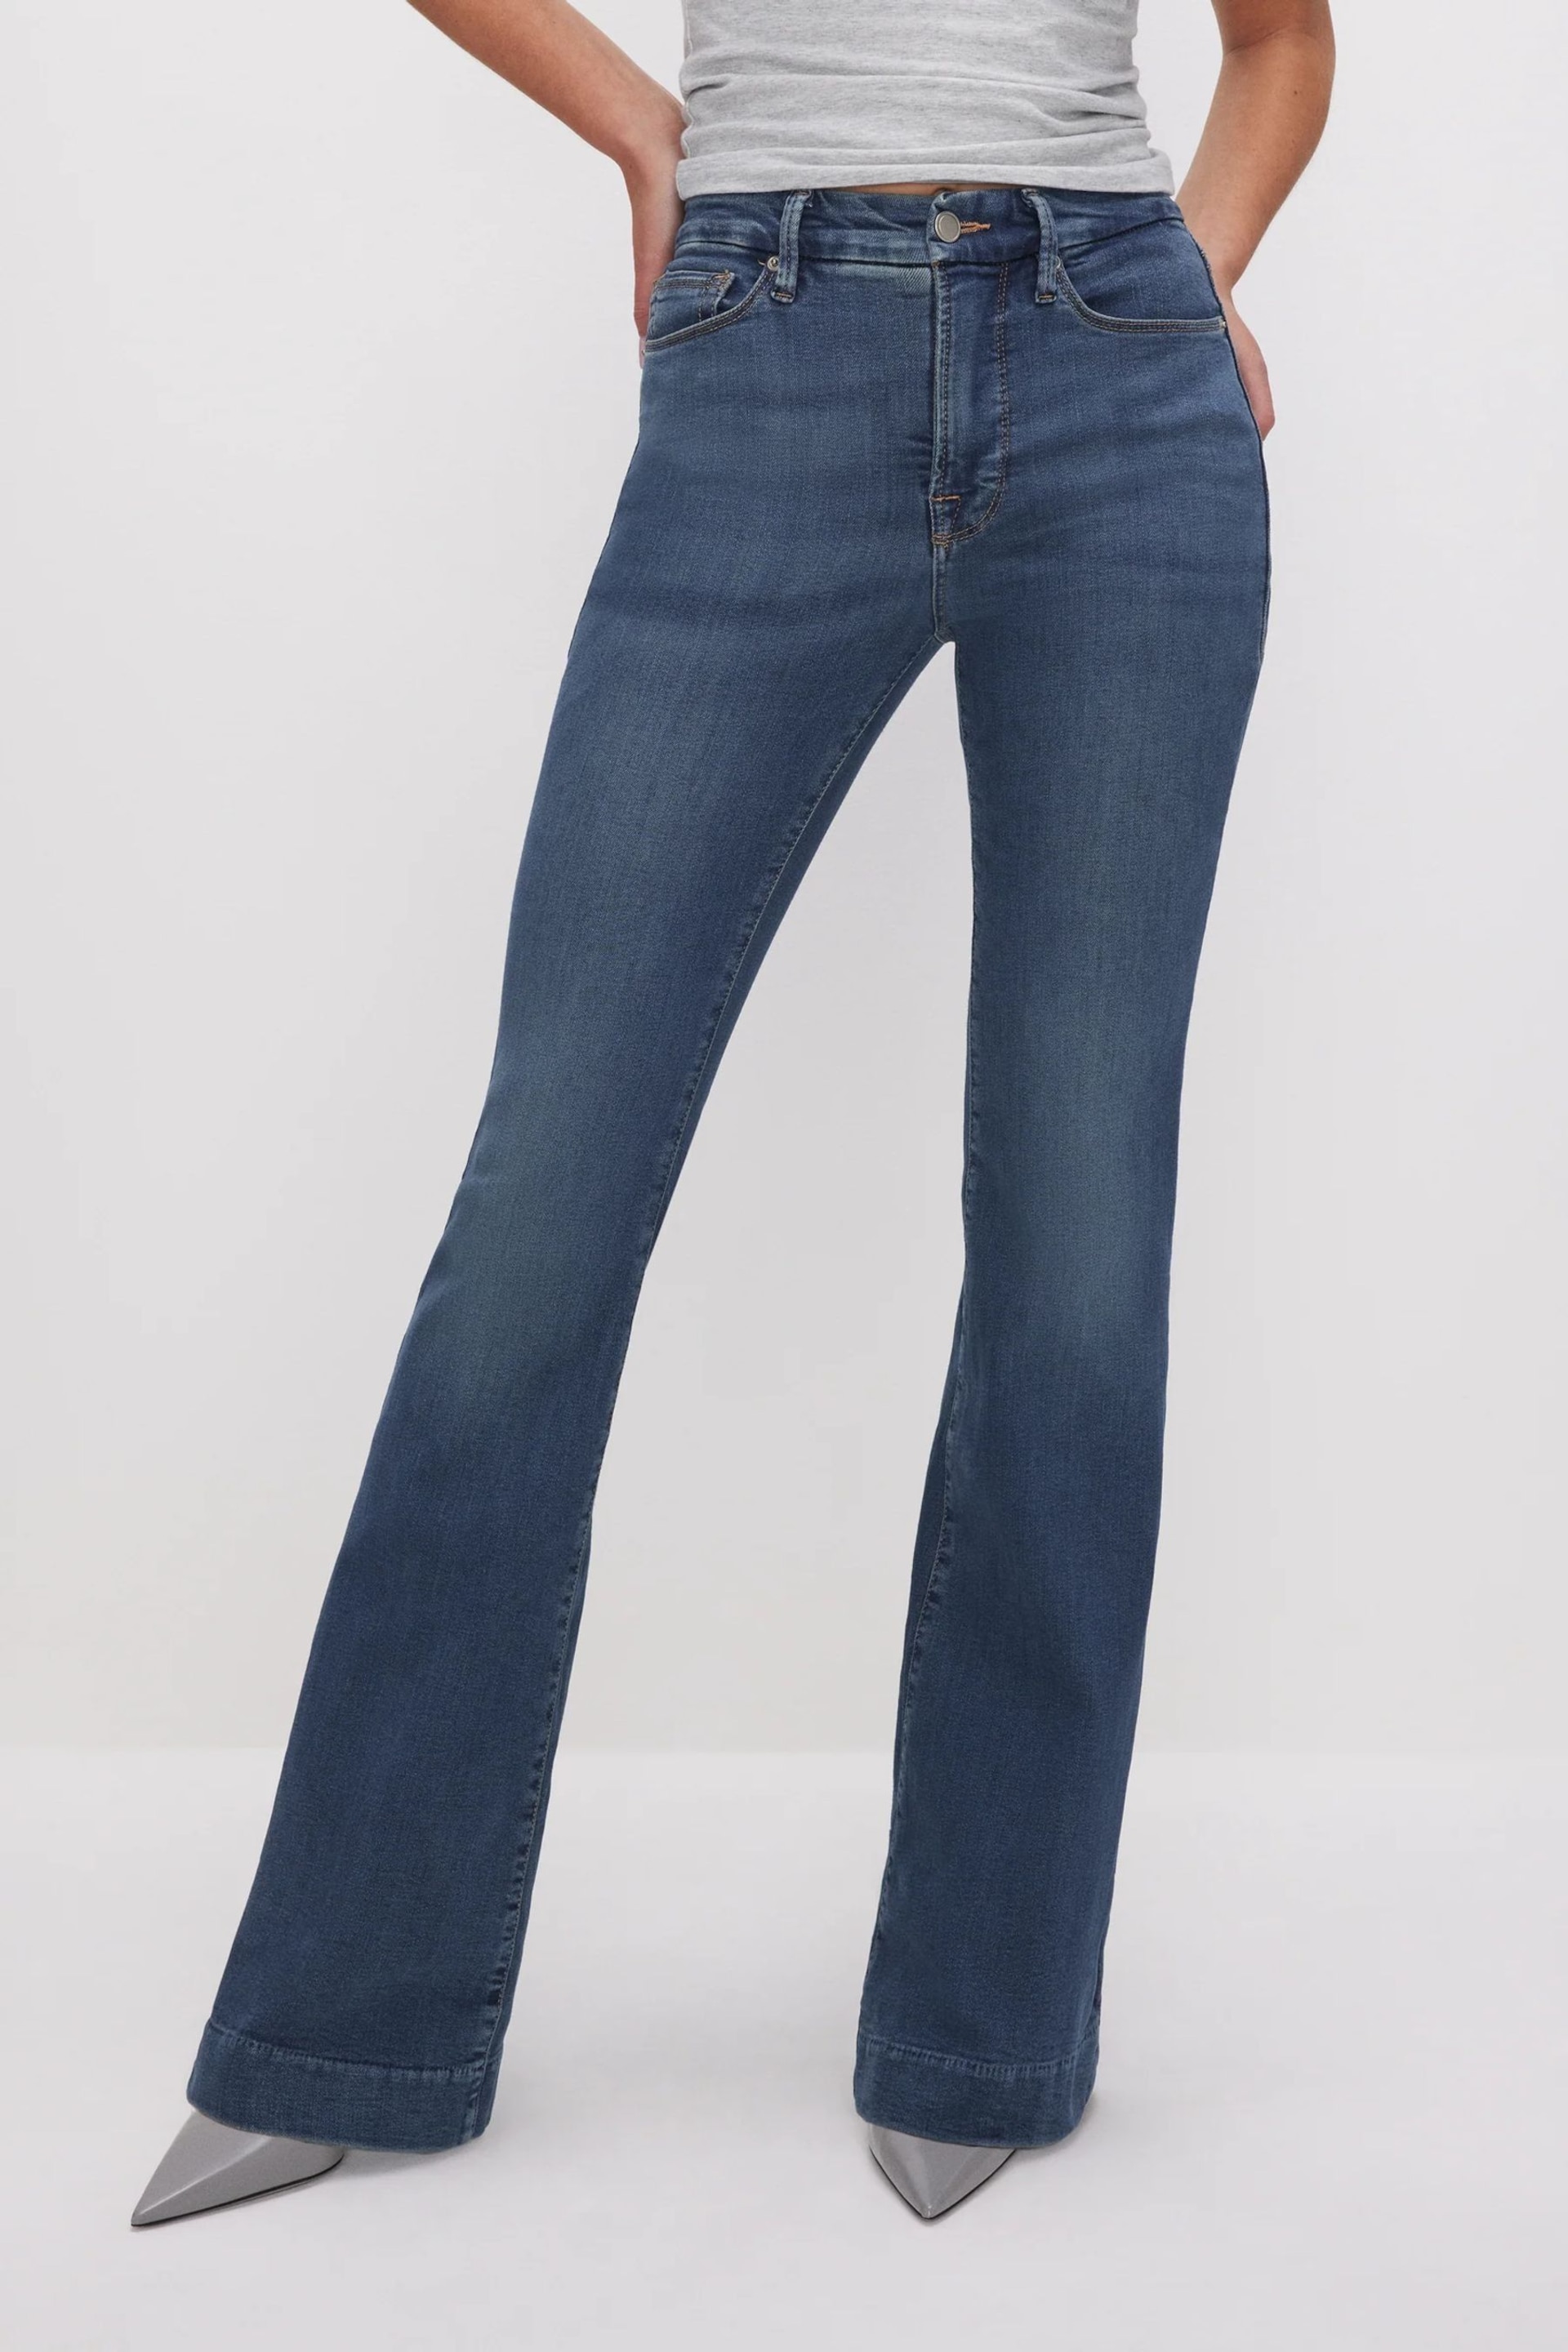 Good American Blue Good Legs Flare Jeans - Image 1 of 4